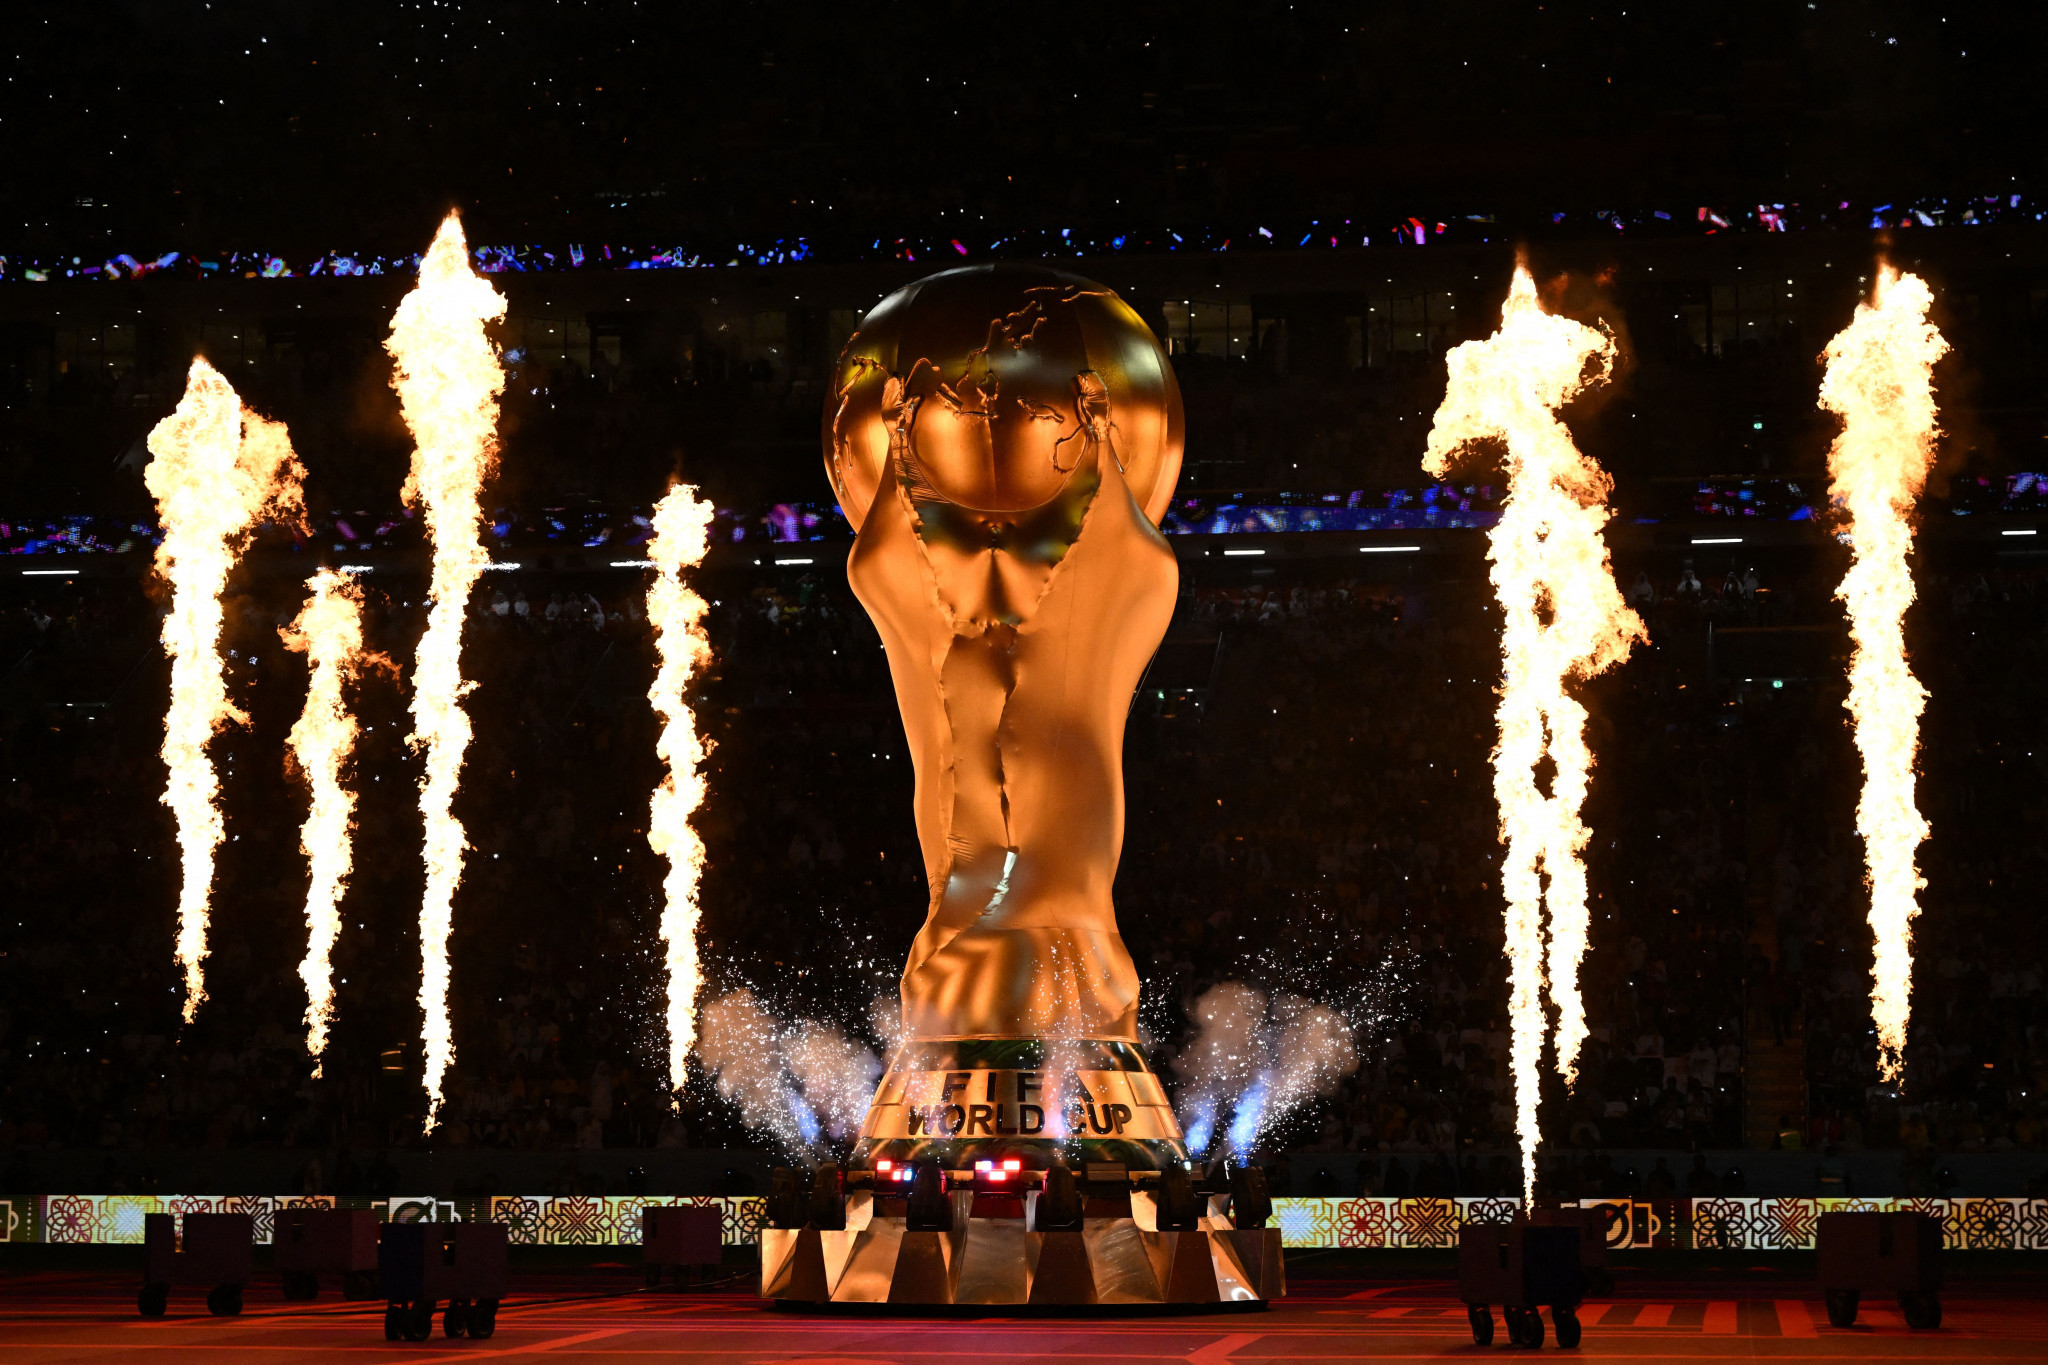 Prior to kickoff, the Opening Ceremony set the arena alight in Al Khor ©Getty Images